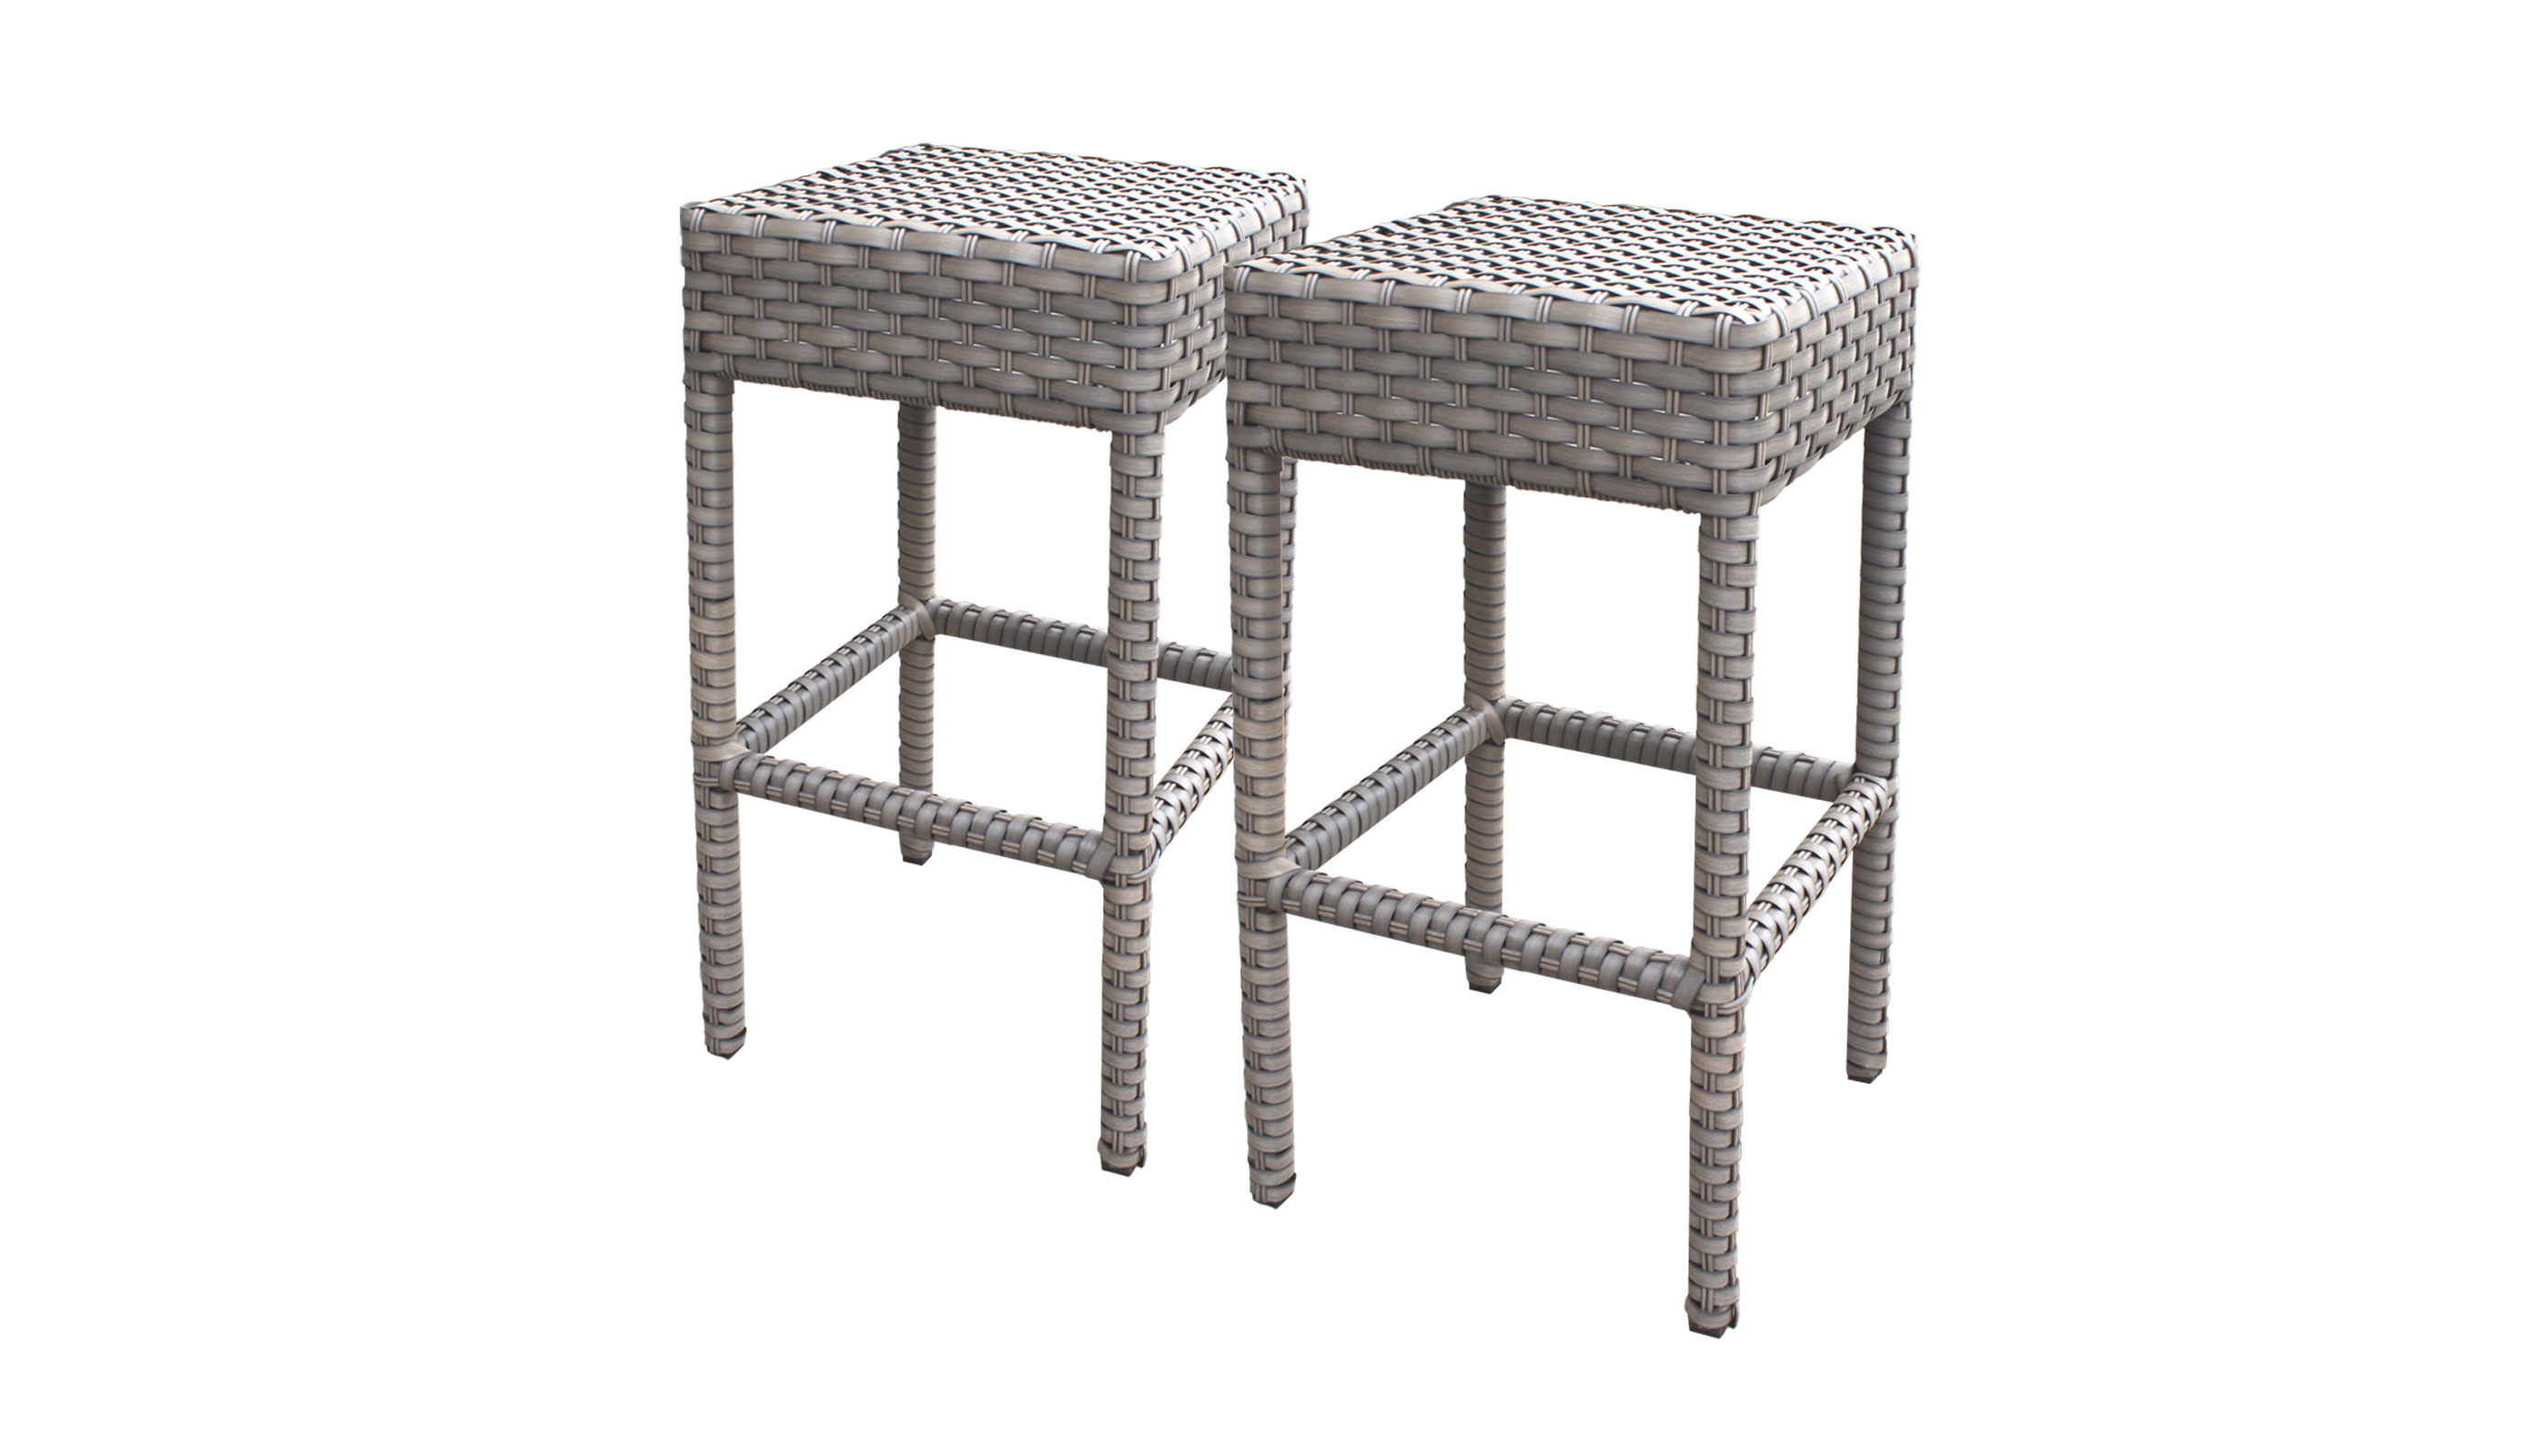 Florence Bar Table Set with Cart, Basket, and 4 Backless Barstools 7 Piece Outdoor Wicker Patio Furniture - TK Classics